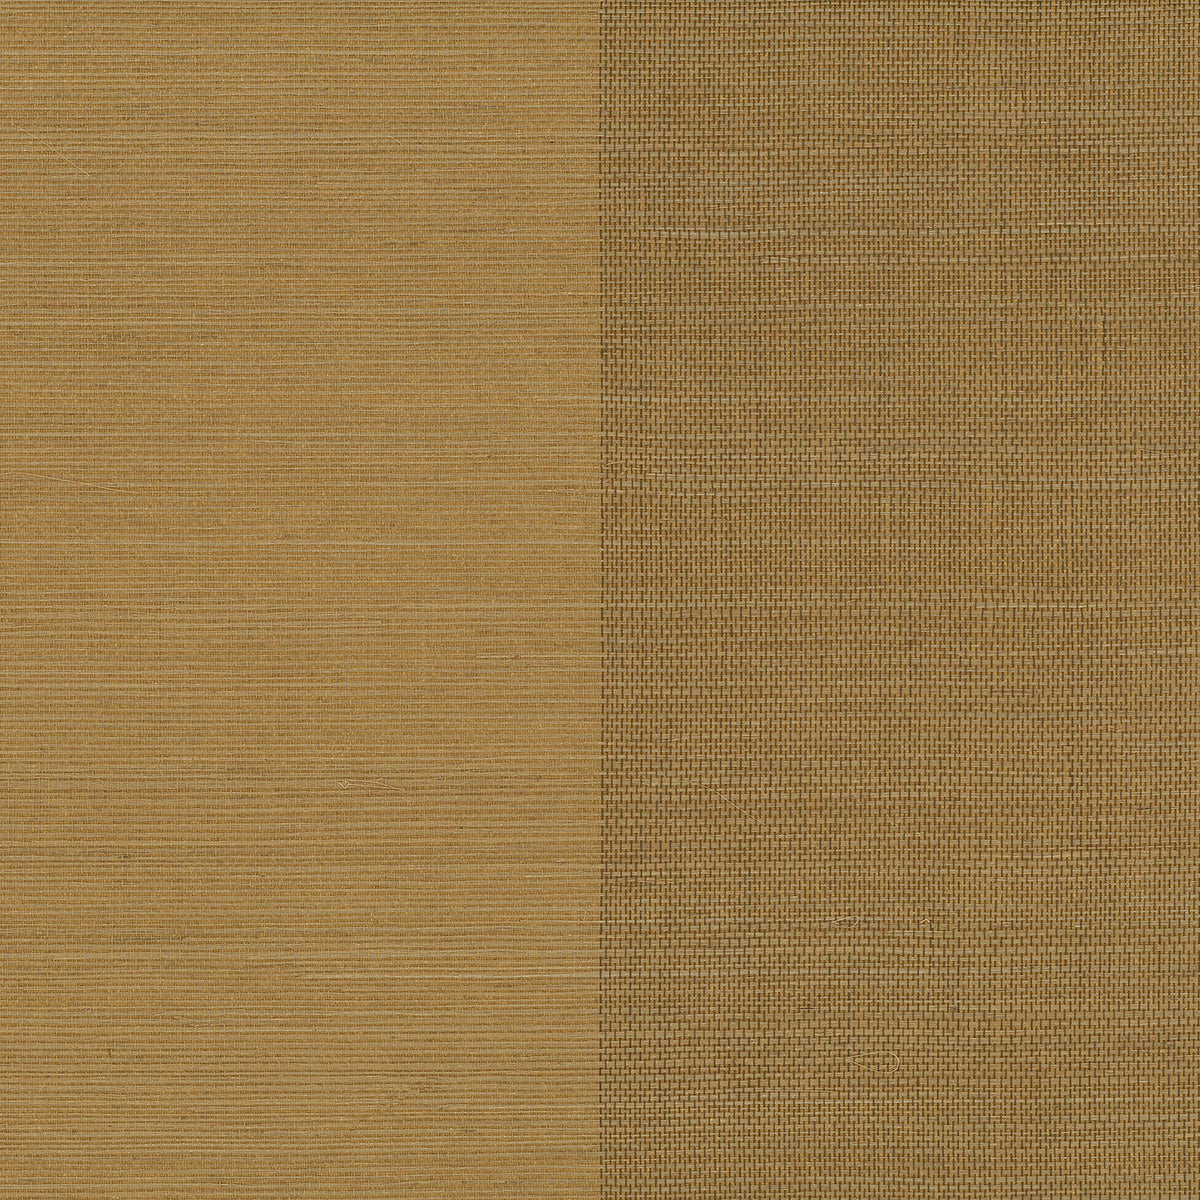 Yue Ying Light Brown Grasscloth  | Brewster Wallcovering